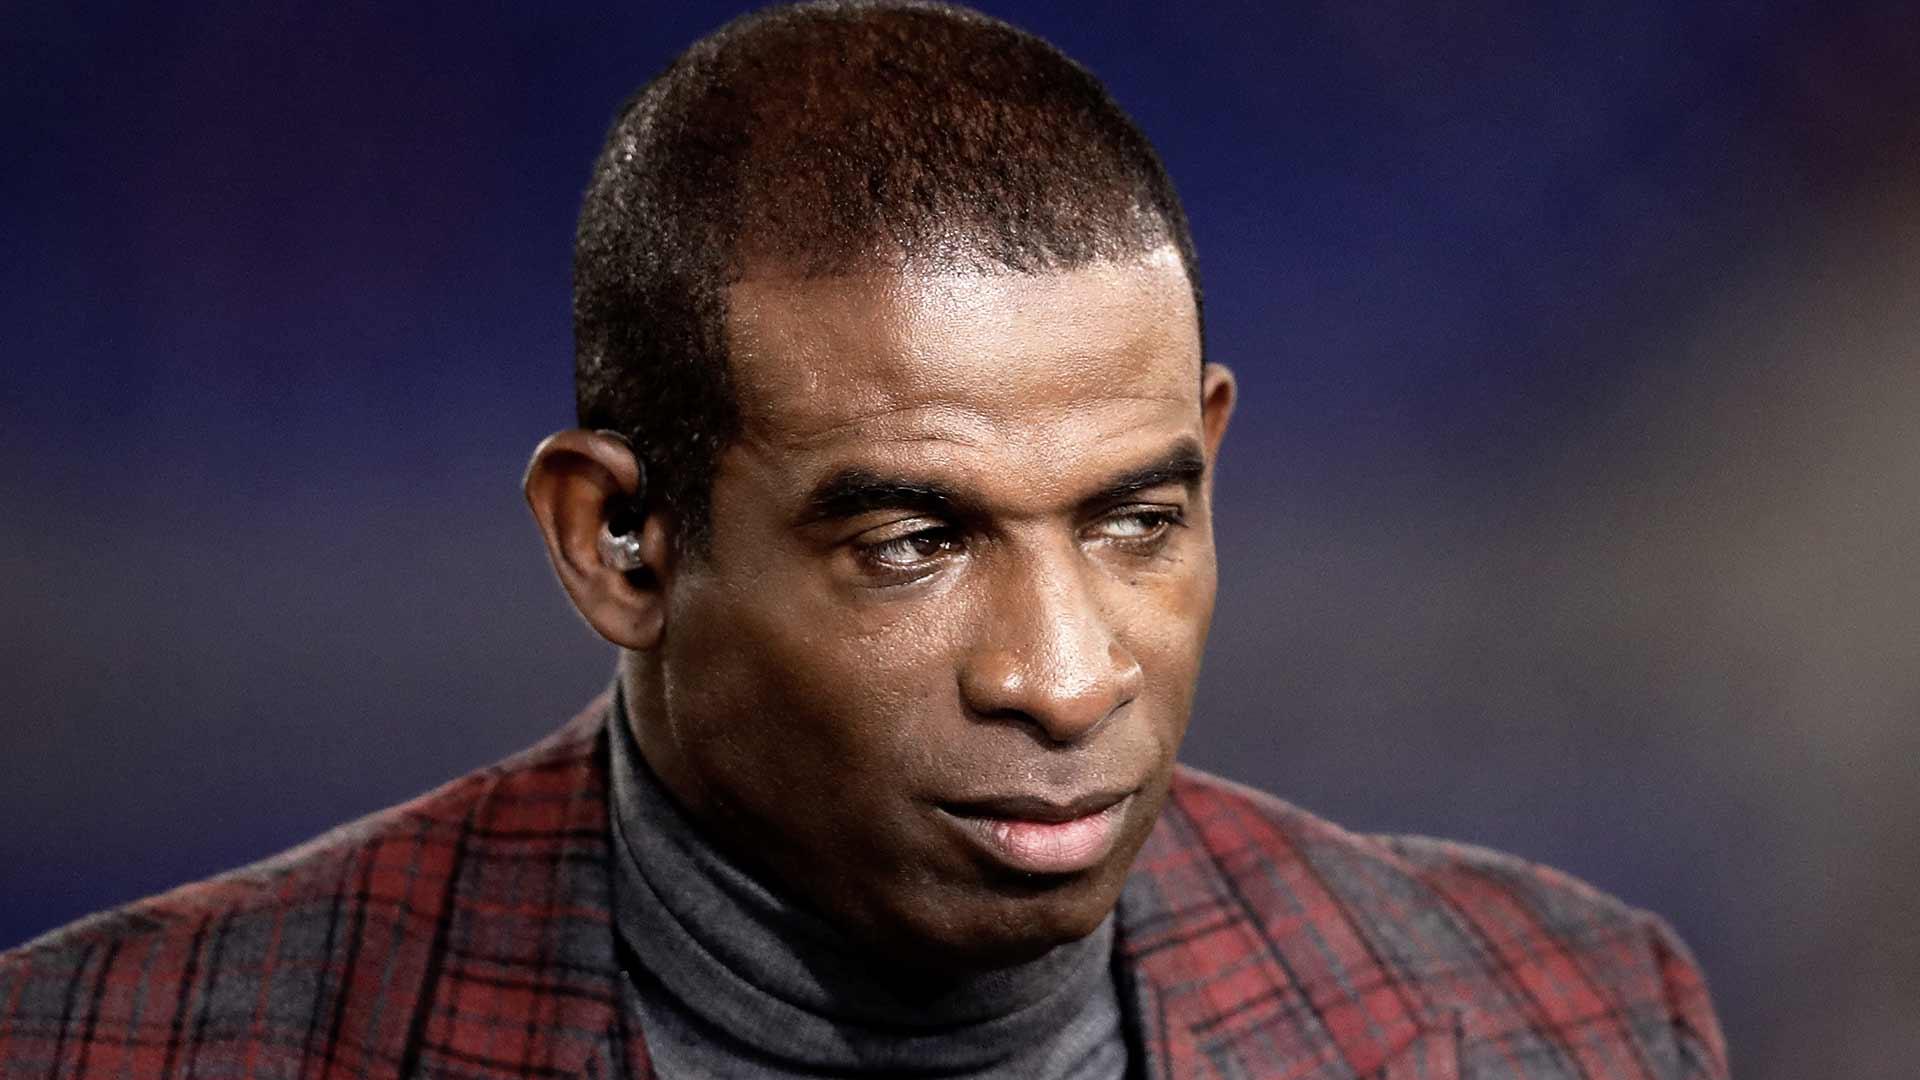 NFL Legend Deion Sanders Sues Over Missing Grand Piano and Damaged Priceless Memorabilia